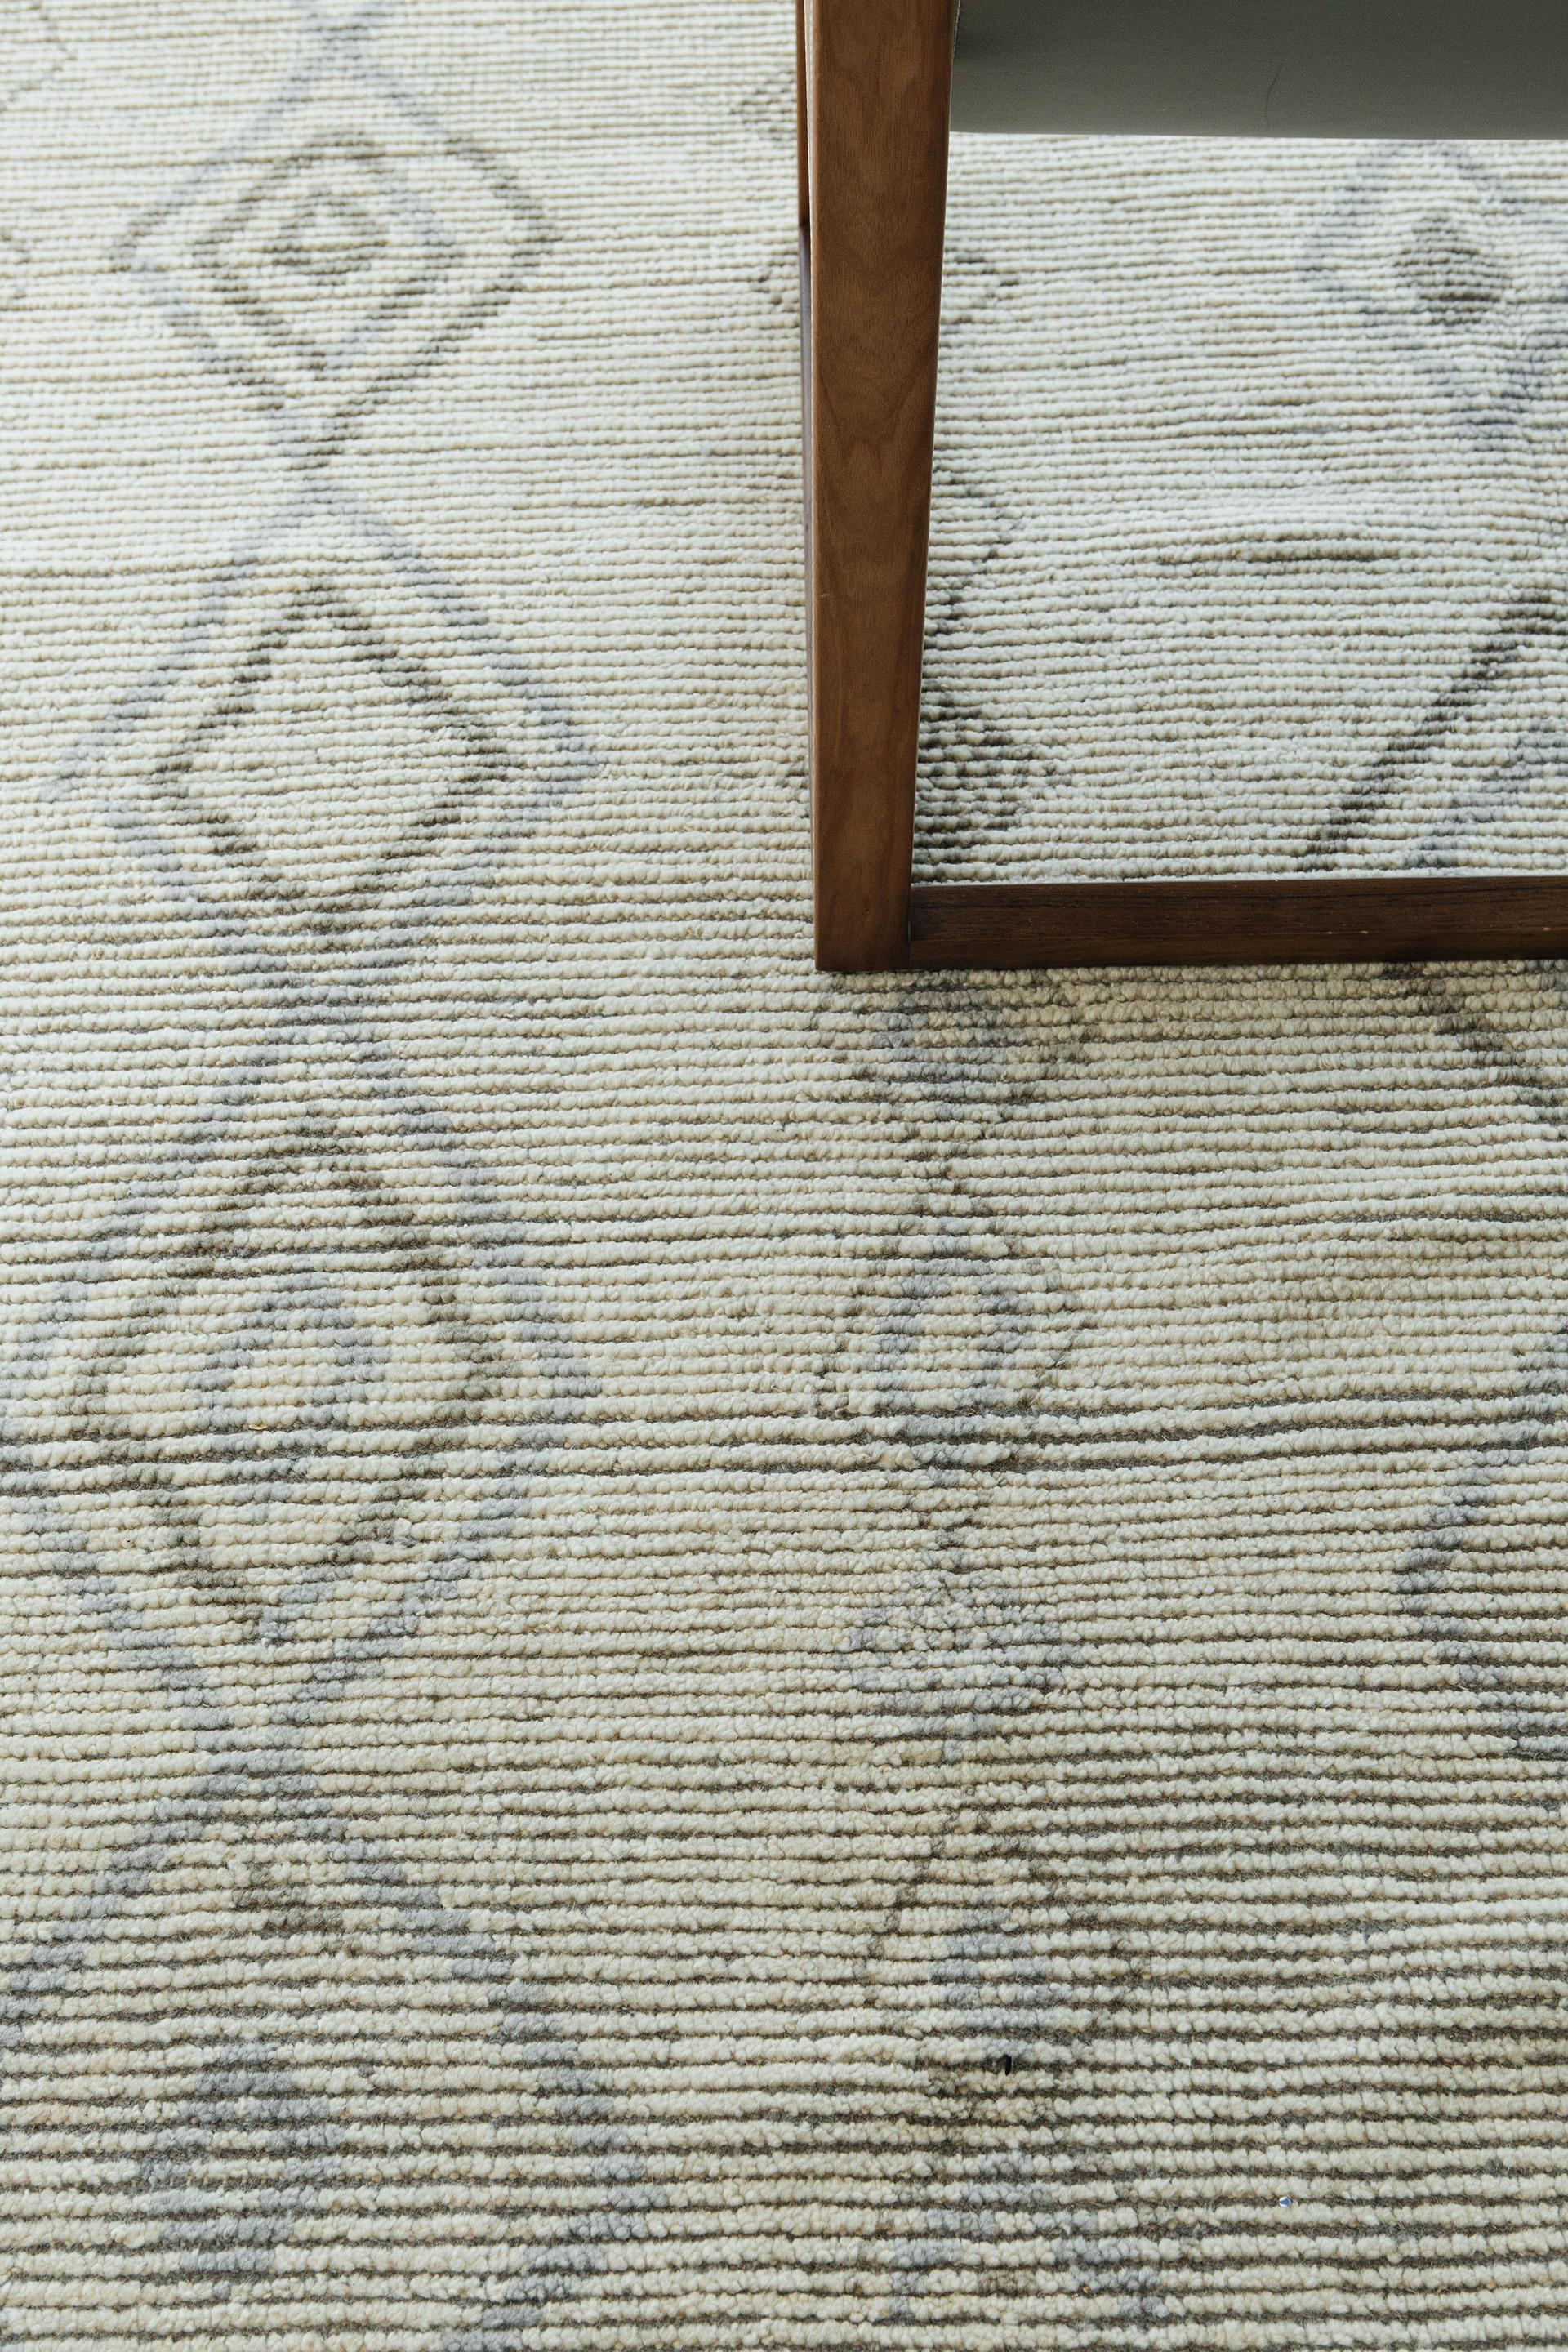 Designed in Los Angeles with inspiration from the Atlas Mountains of Morocco is this unique tribal rug. Weaved with handspun wool, this pile weave consists of a charming ribbed surface as well as intuitive diamond motifs that are latticed in